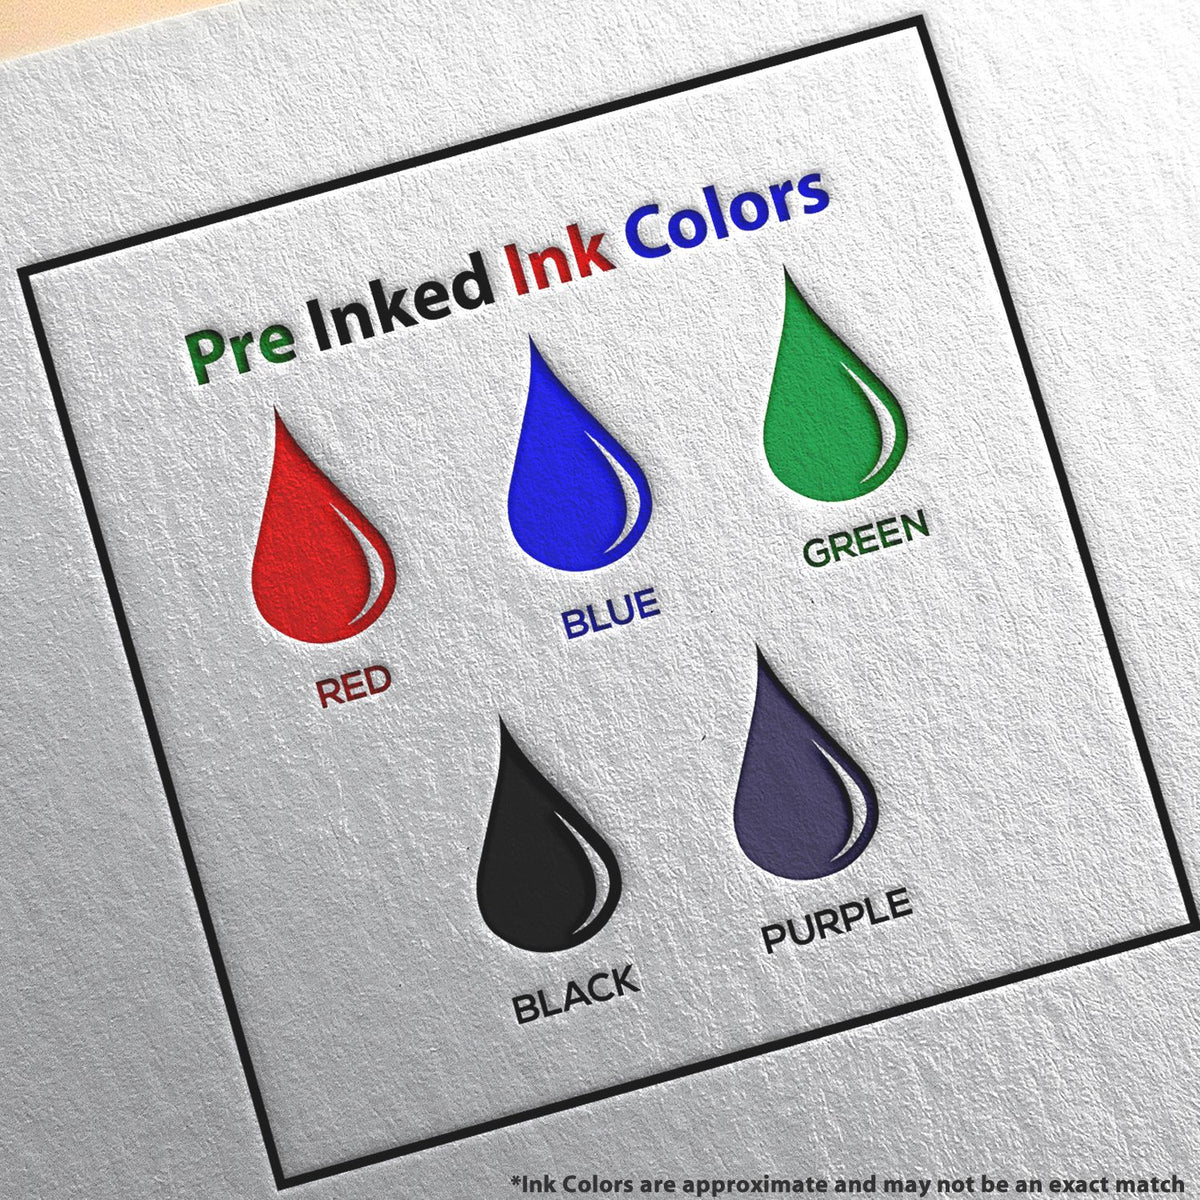 A picture showing the different ink colors or hues available for the Premium MaxLight Pre-Inked New Hampshire Engineering Stamp product.